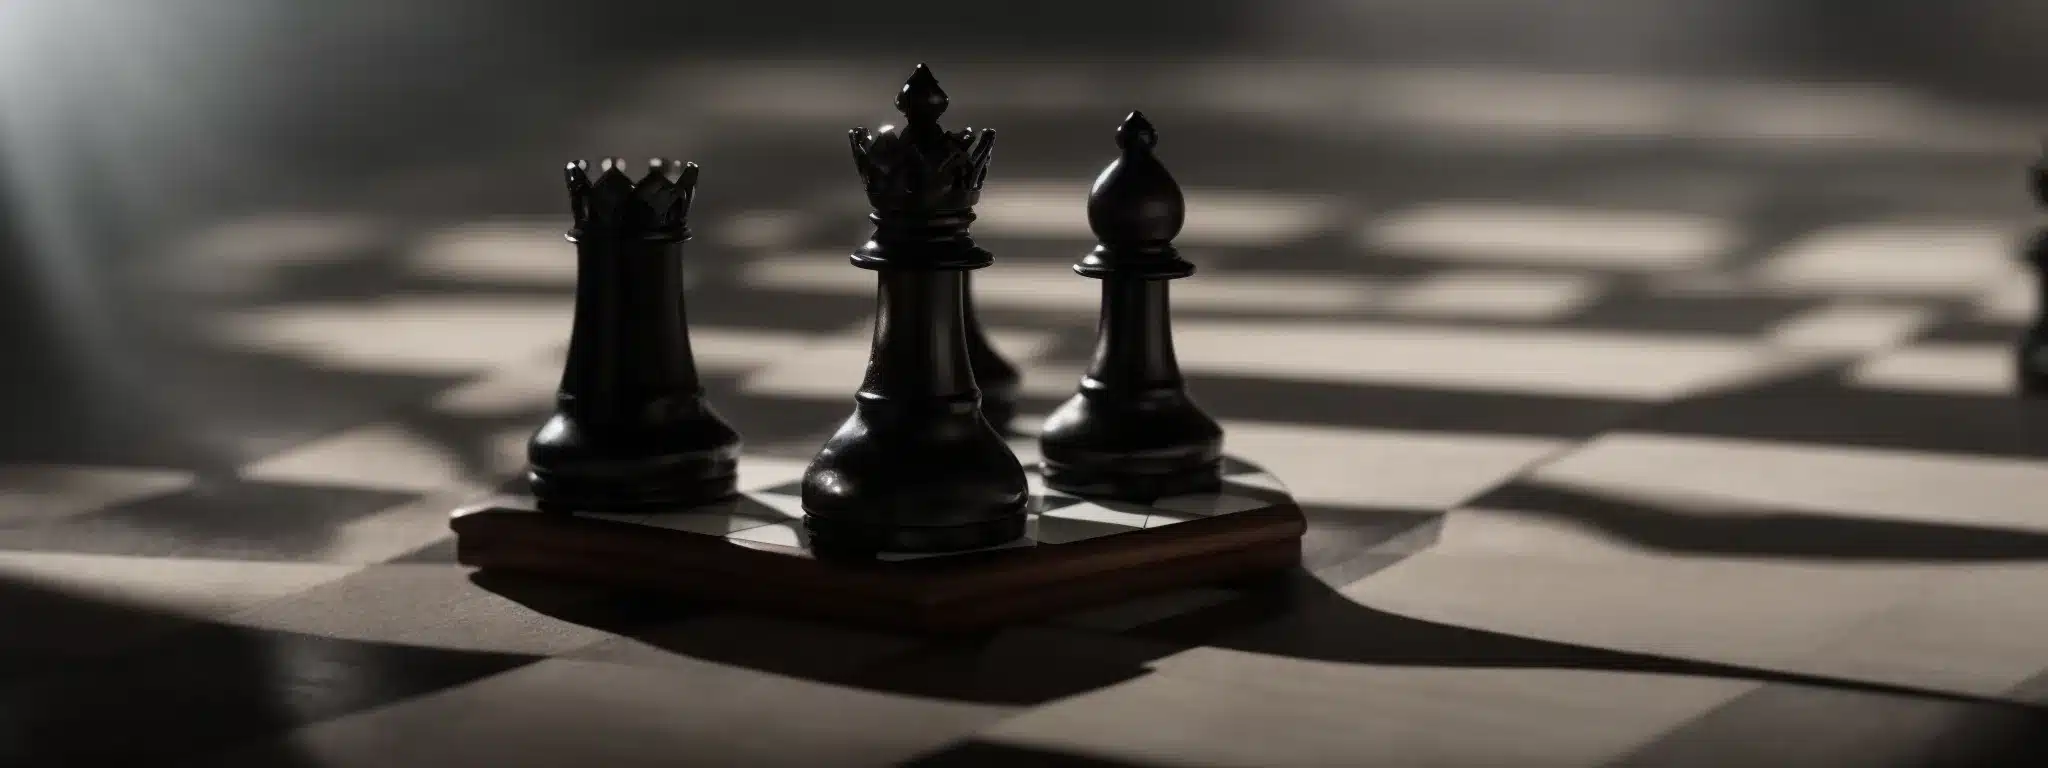 A Chessboard Under A Spotlight With A Single Knight Piece Poised In The Center, Exuding Dominance And Focus.